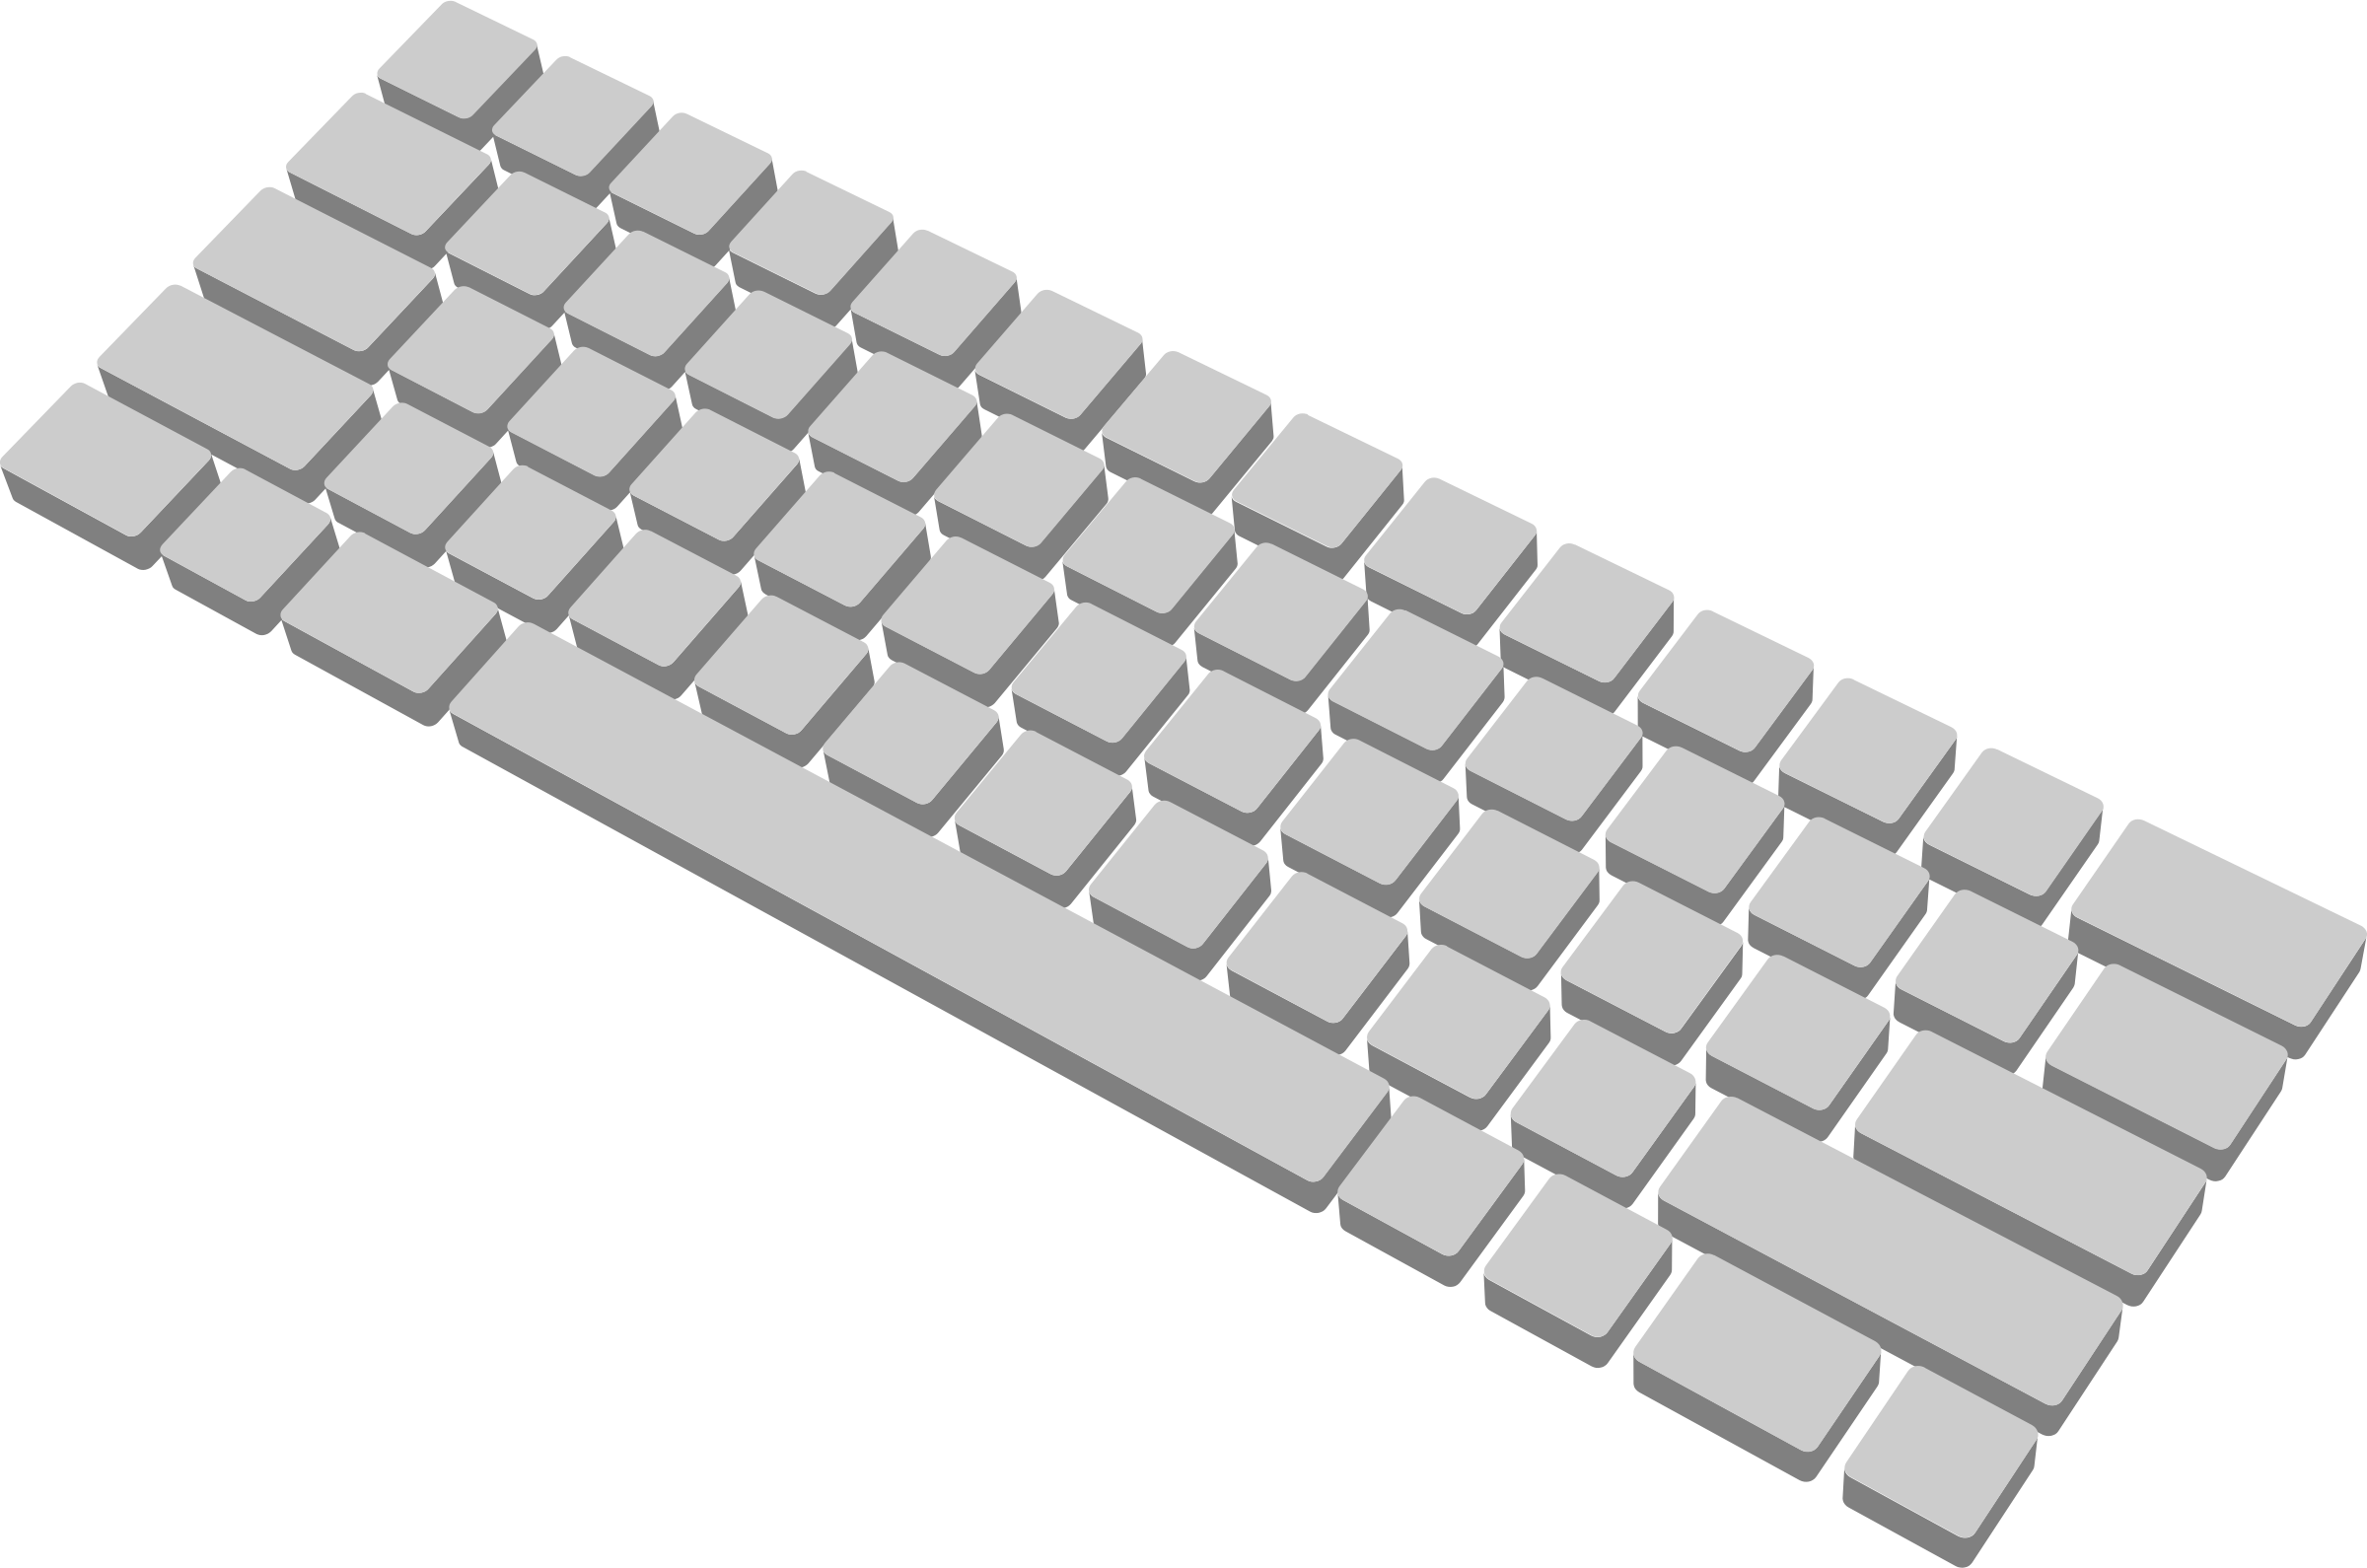 clipart for keyboard - photo #6